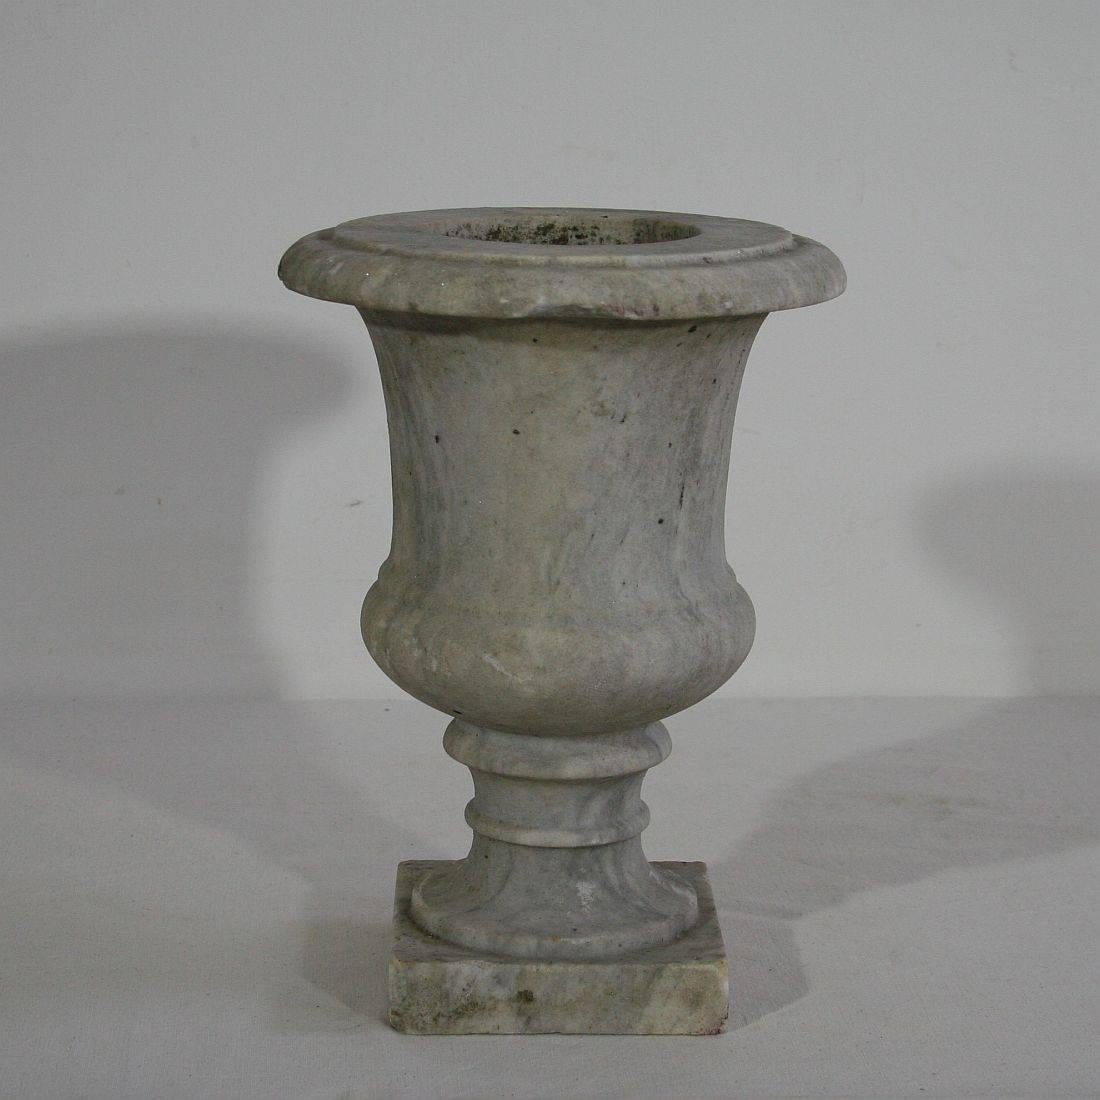 Rare white marble vase-garden urn. Beautiful decorative centrepiece.
England, circa 1800-1850.
Weathered, some small losses.